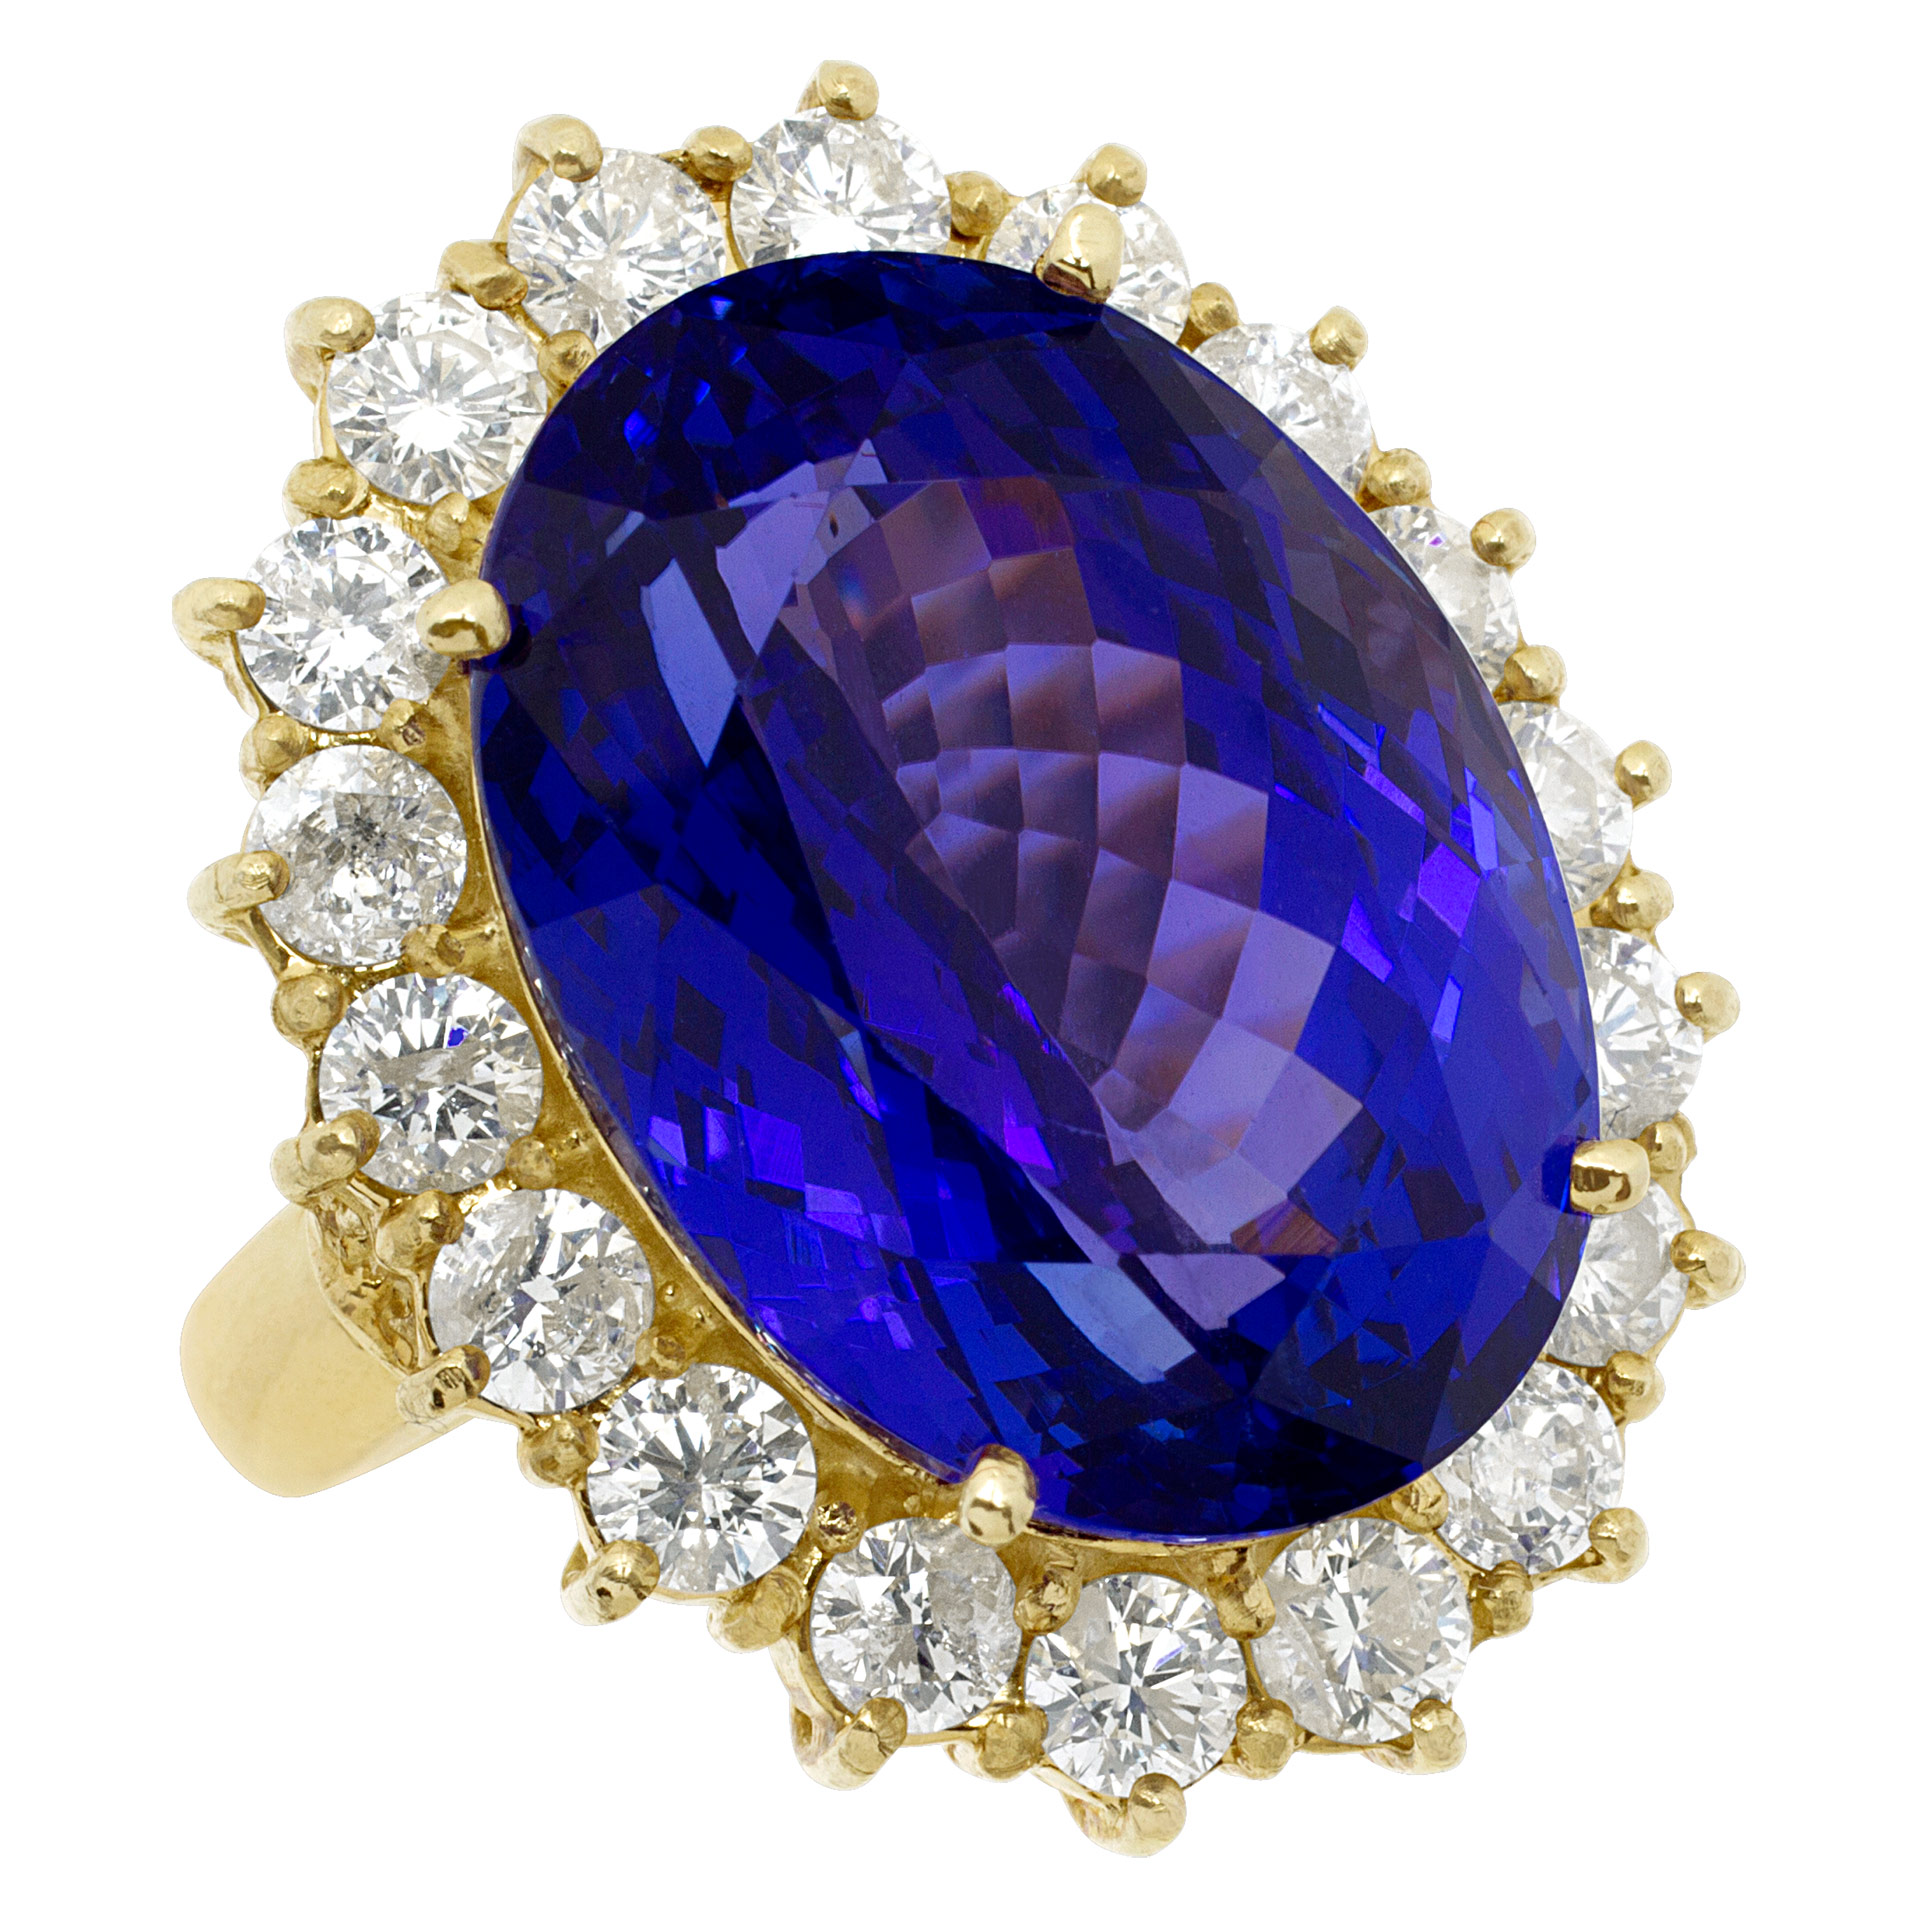 Tanzanite and diamond ring in 14k gold with approx. 25 carats tanzanite image 3